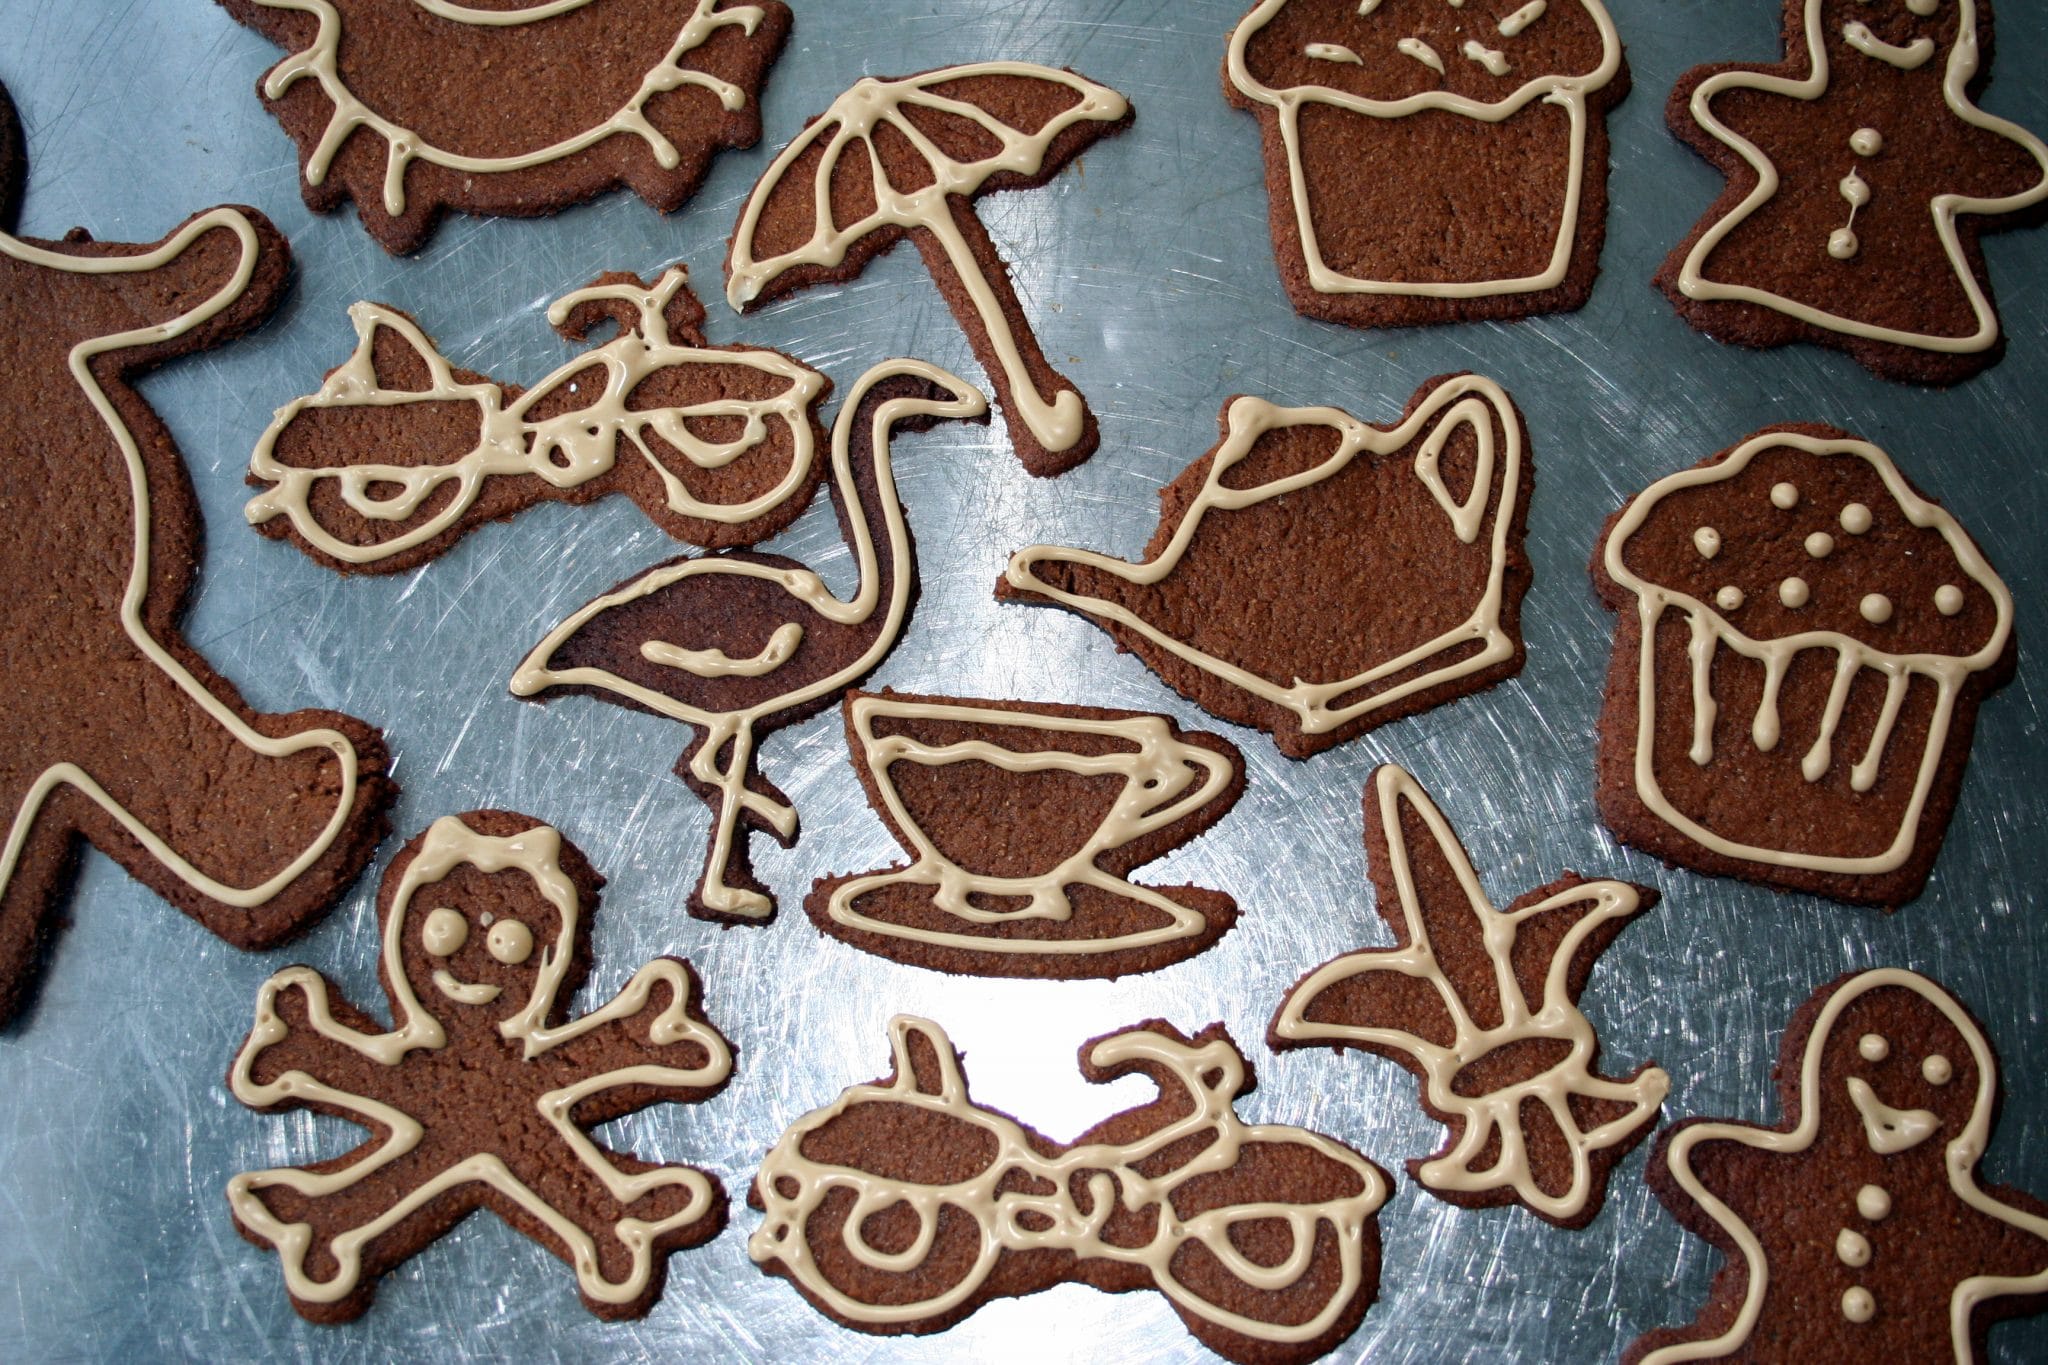 Decorated gingerbread cookies in various shapes on baking sheet